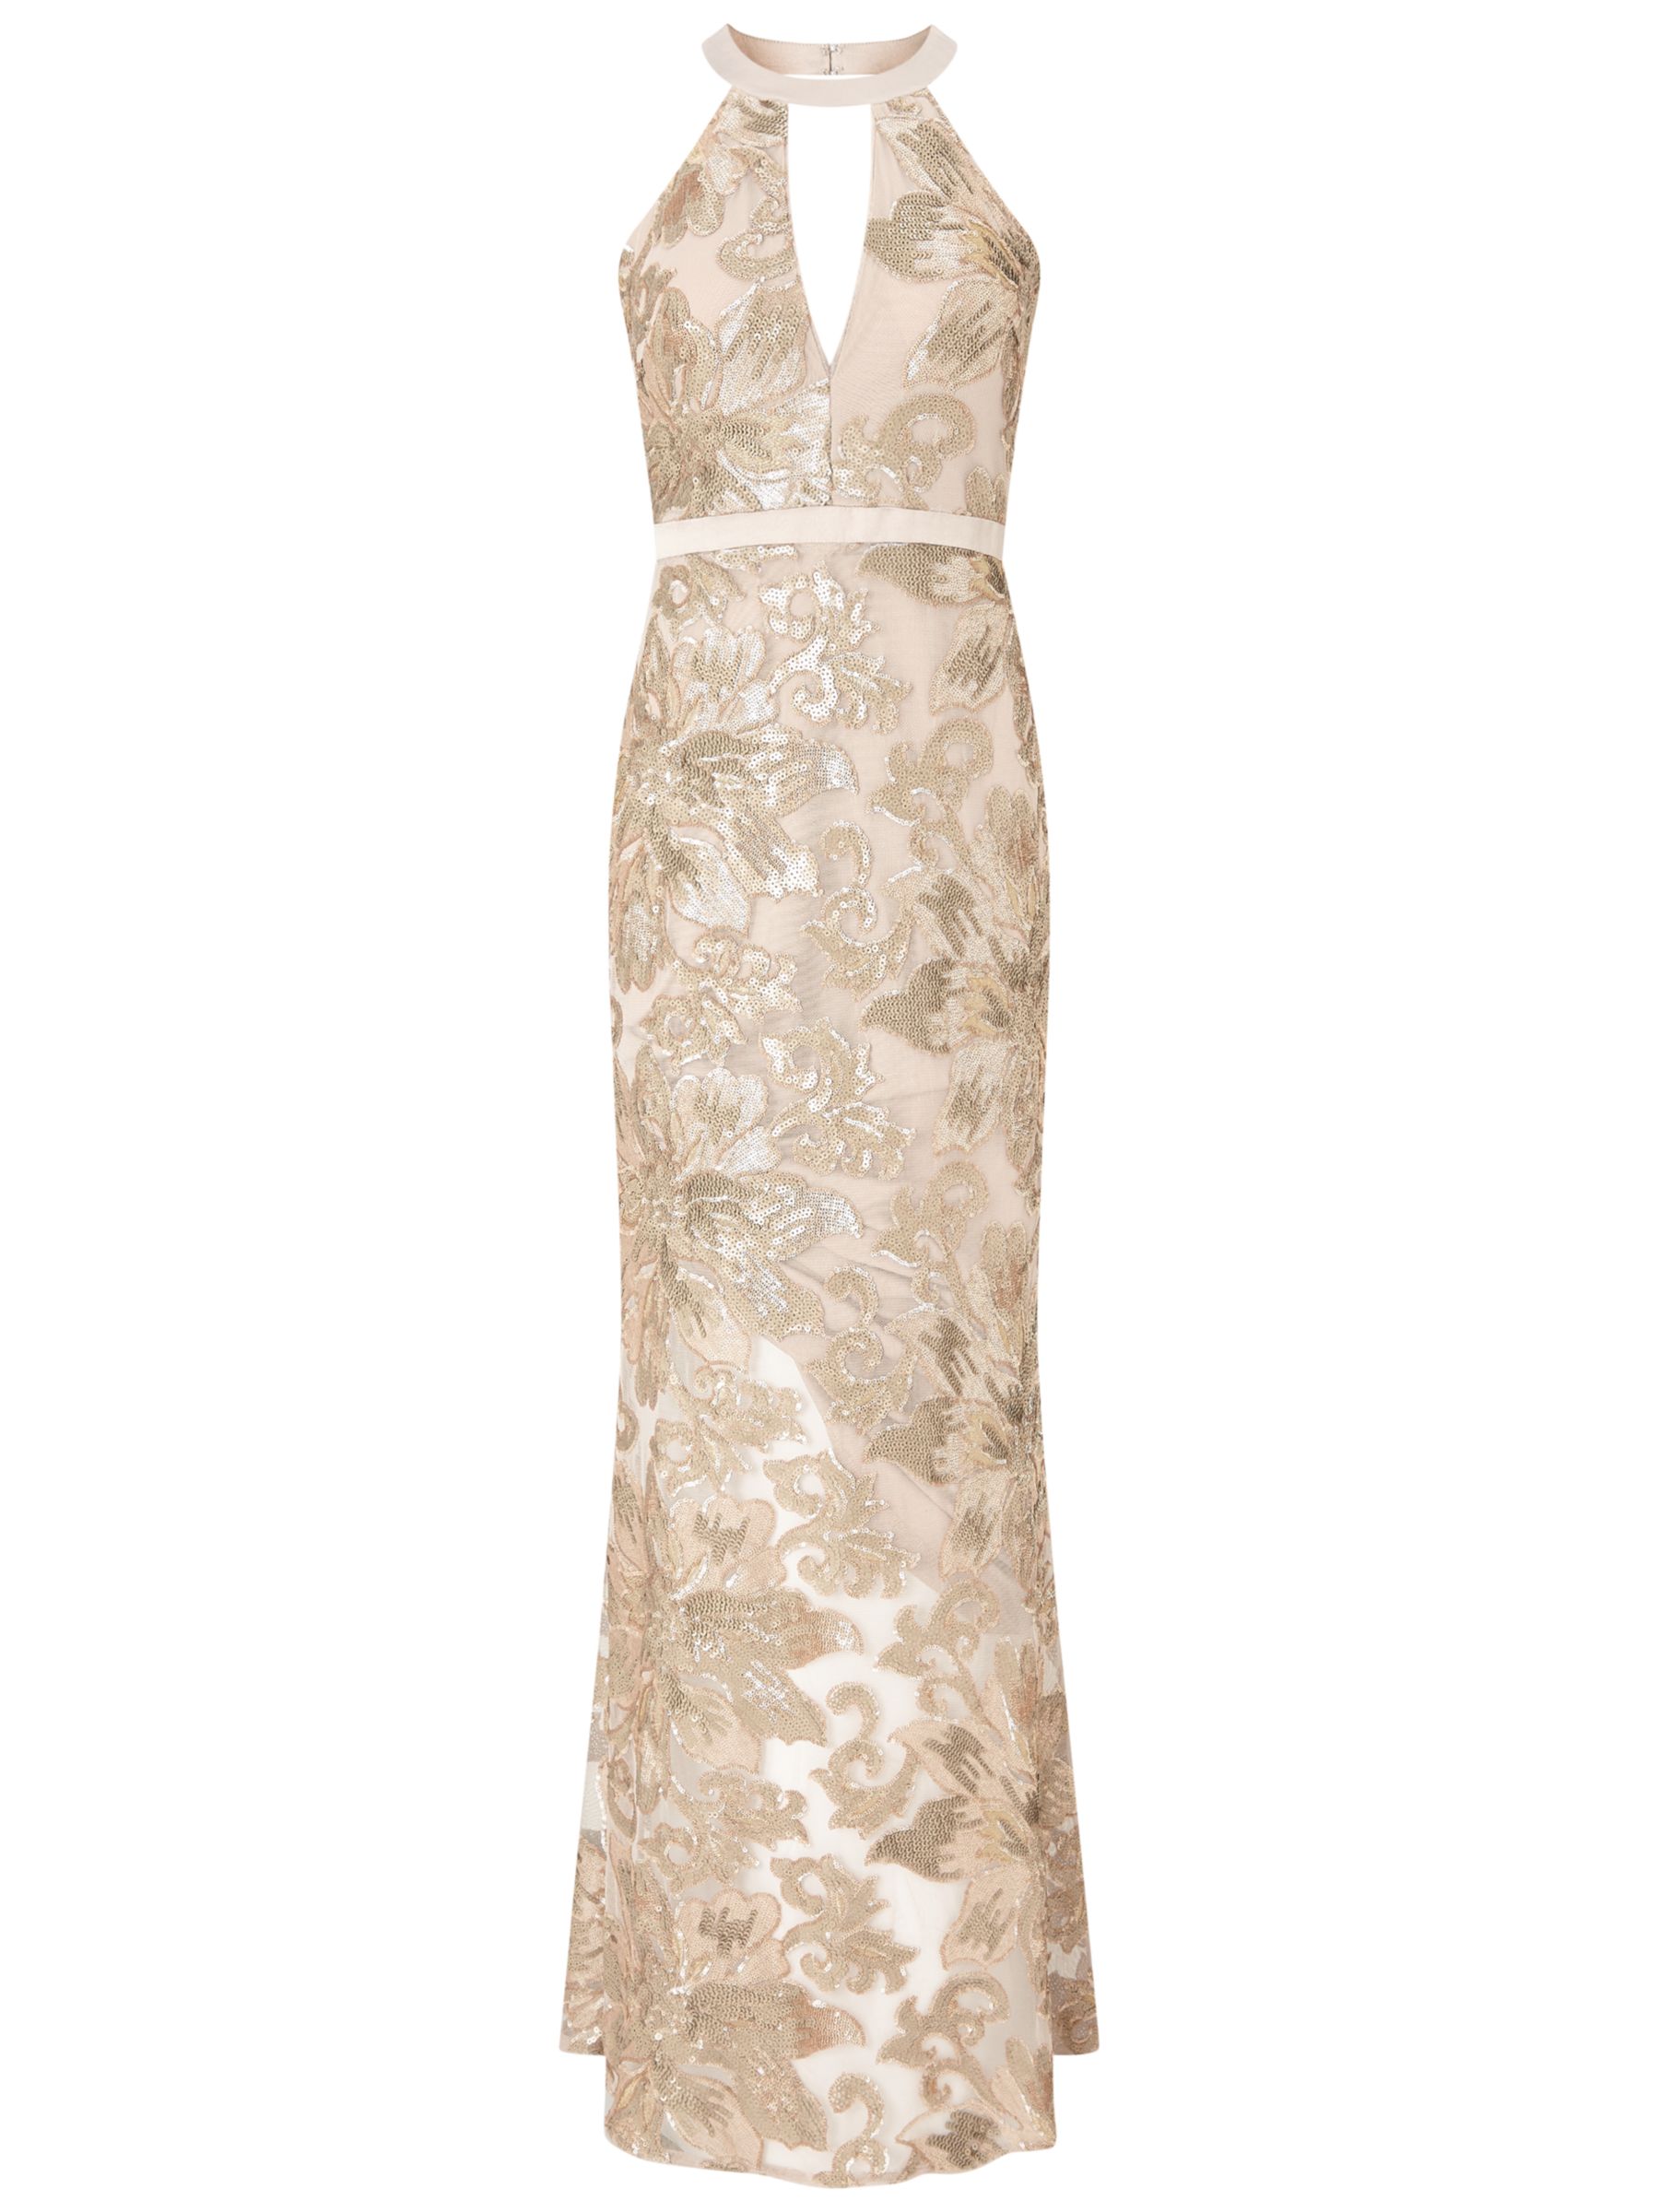 Adrianna Papell Embellished Halterneck Mermaid Gown, Rose Gold